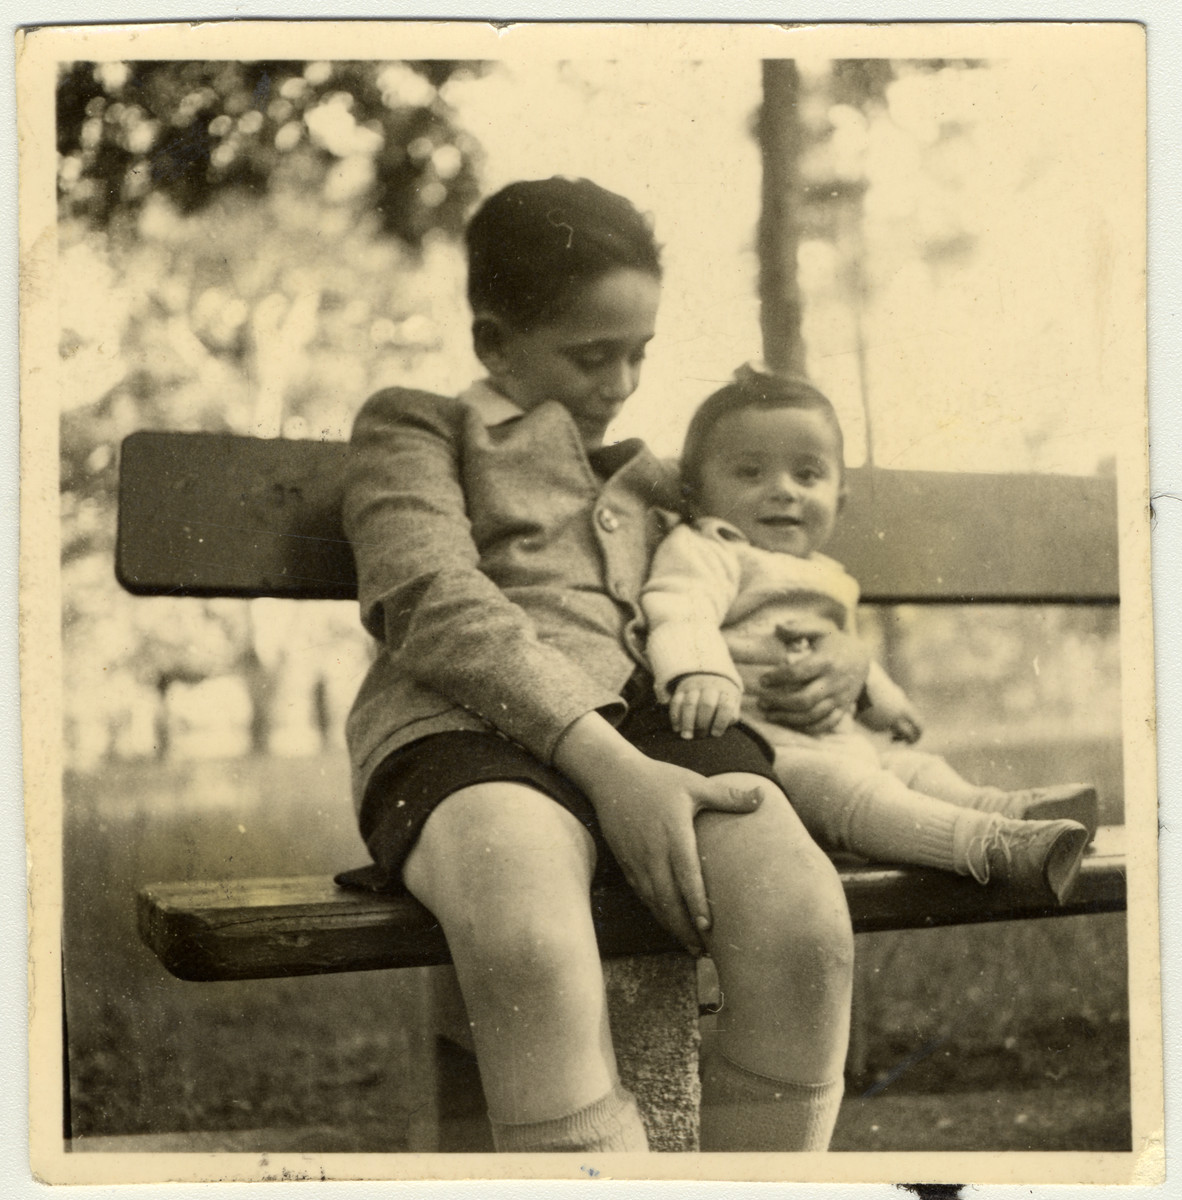 Janos Kovasc poses on a park bench with his half-brother, Istvan Reiner.